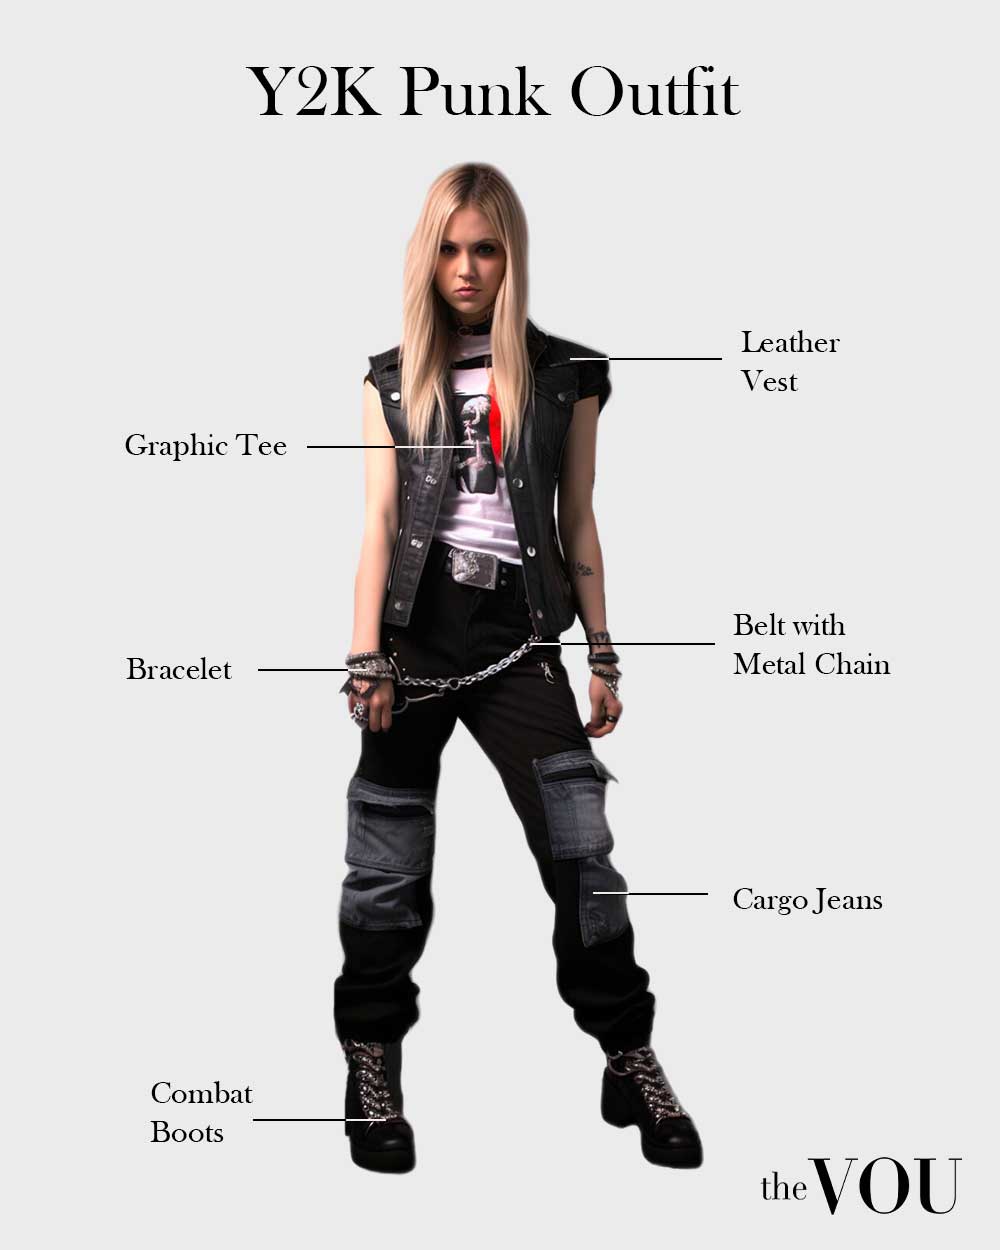 Y2K Punk outfit